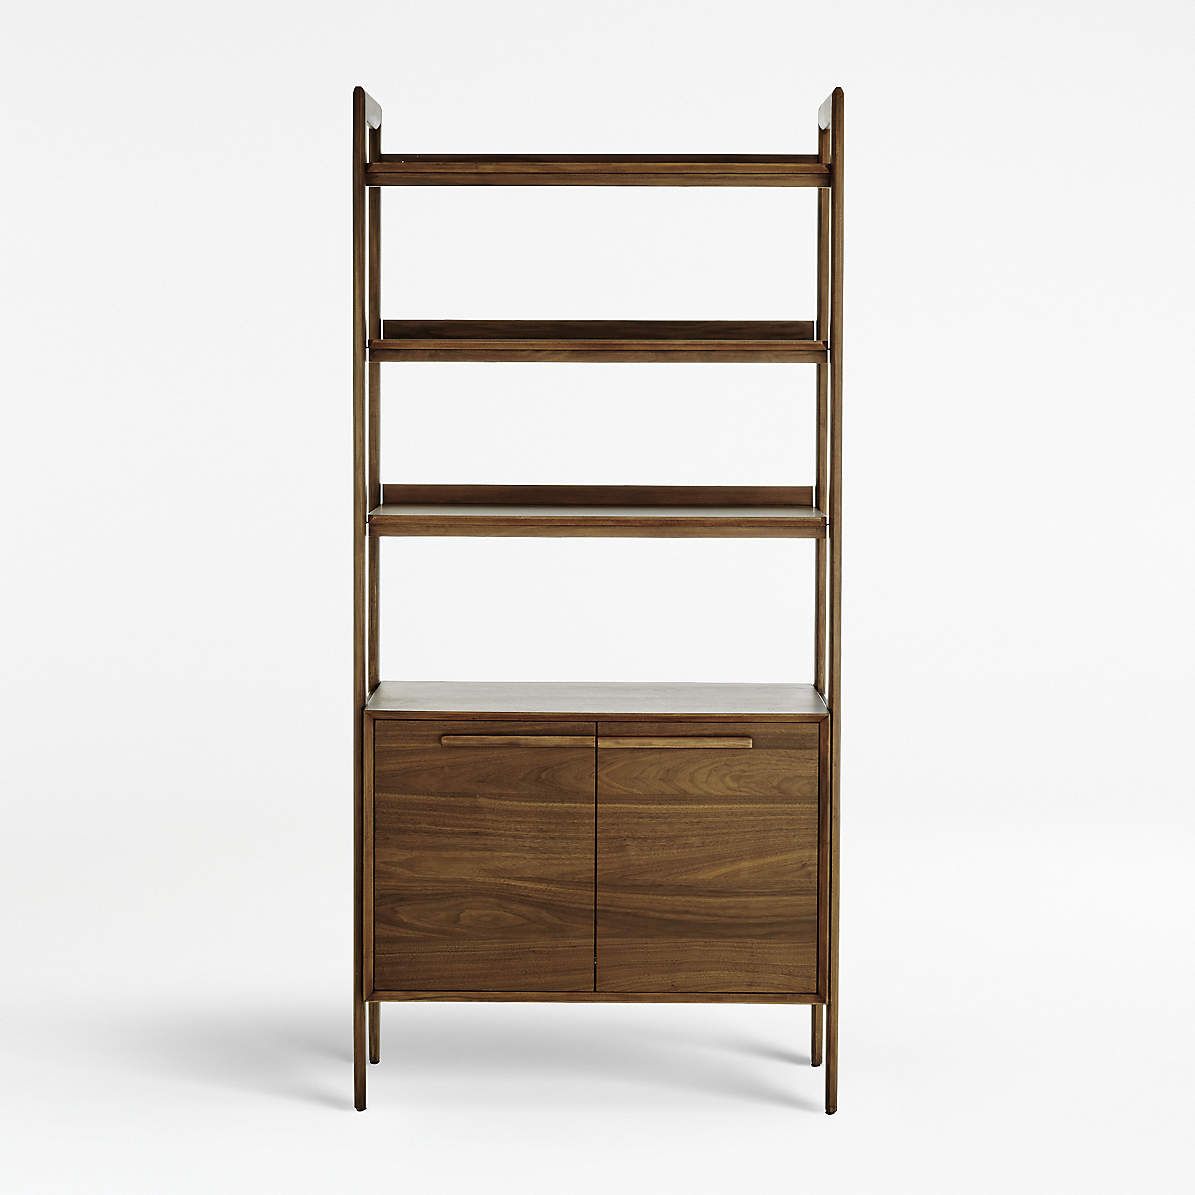 Tate Walnut Storage Bookshelf Cabinet + Reviews | Crate & Barrel Intended For Bookcases With Shelves And Cabinet (View 11 of 15)